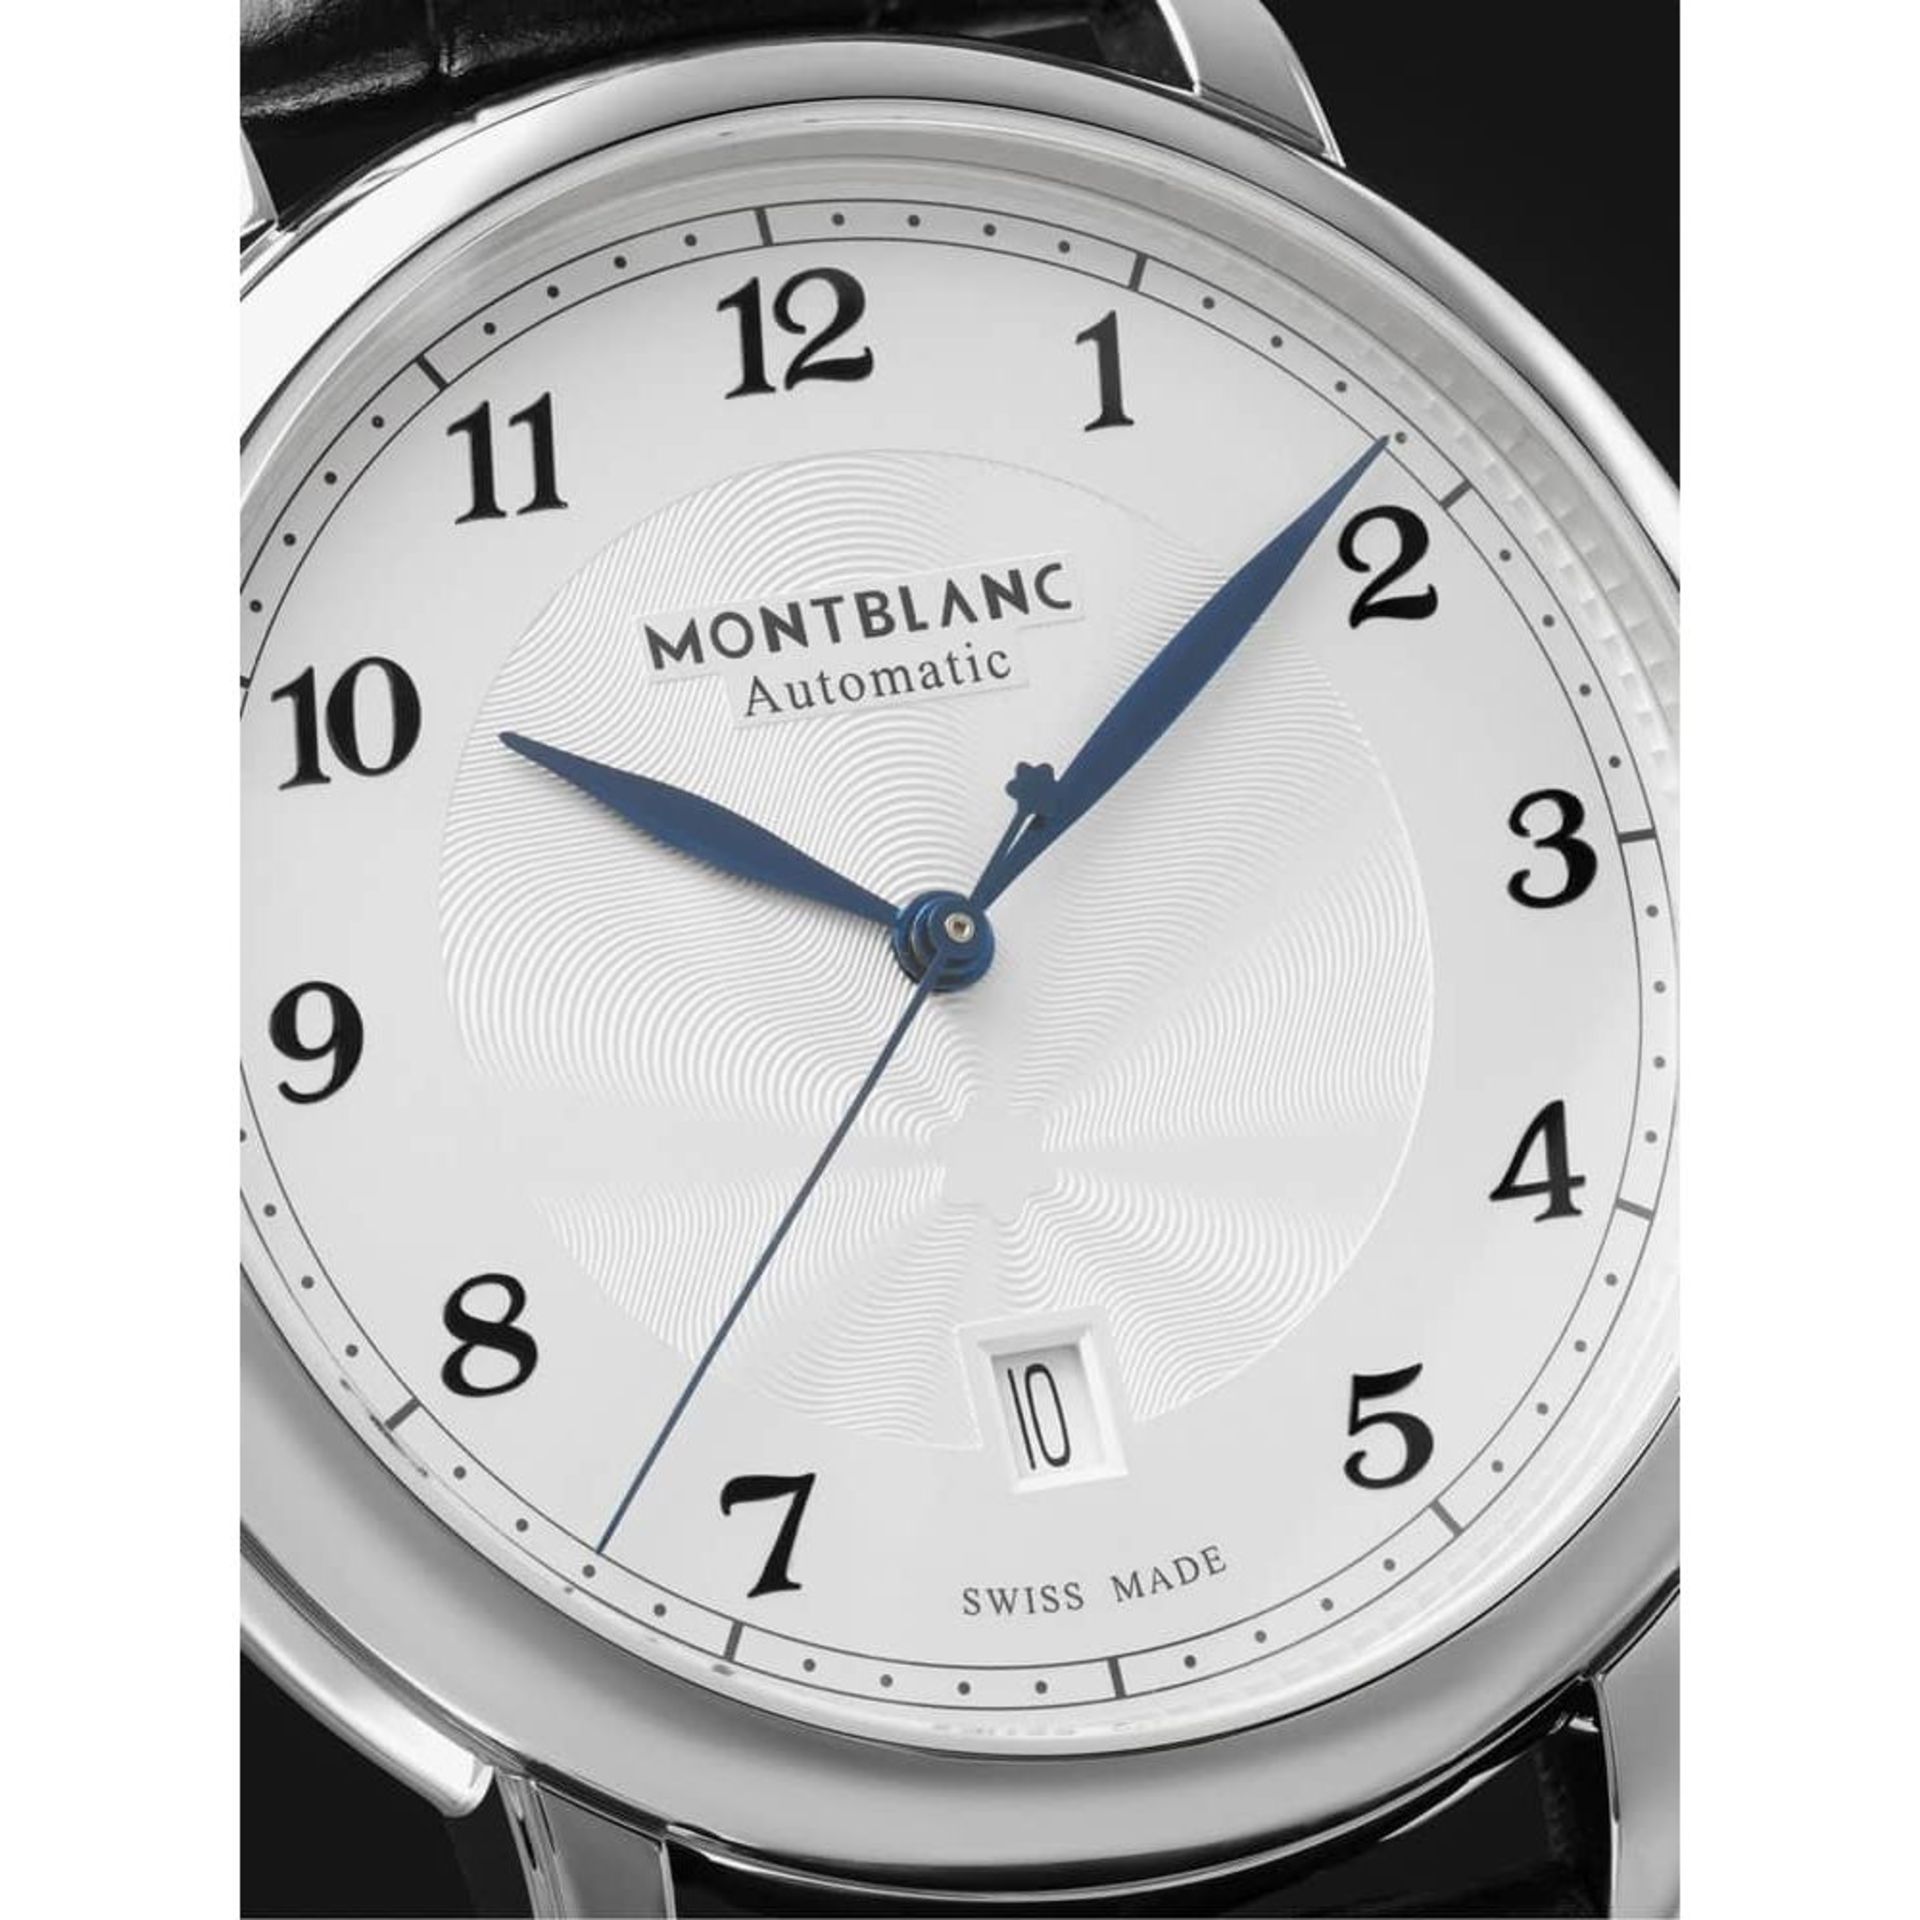 BRAND NEW MONTBLANC MENS STAR LEGACY AUTOMATIC WHITE DIAL WATCH (687) RRP £2800 - Image 5 of 5